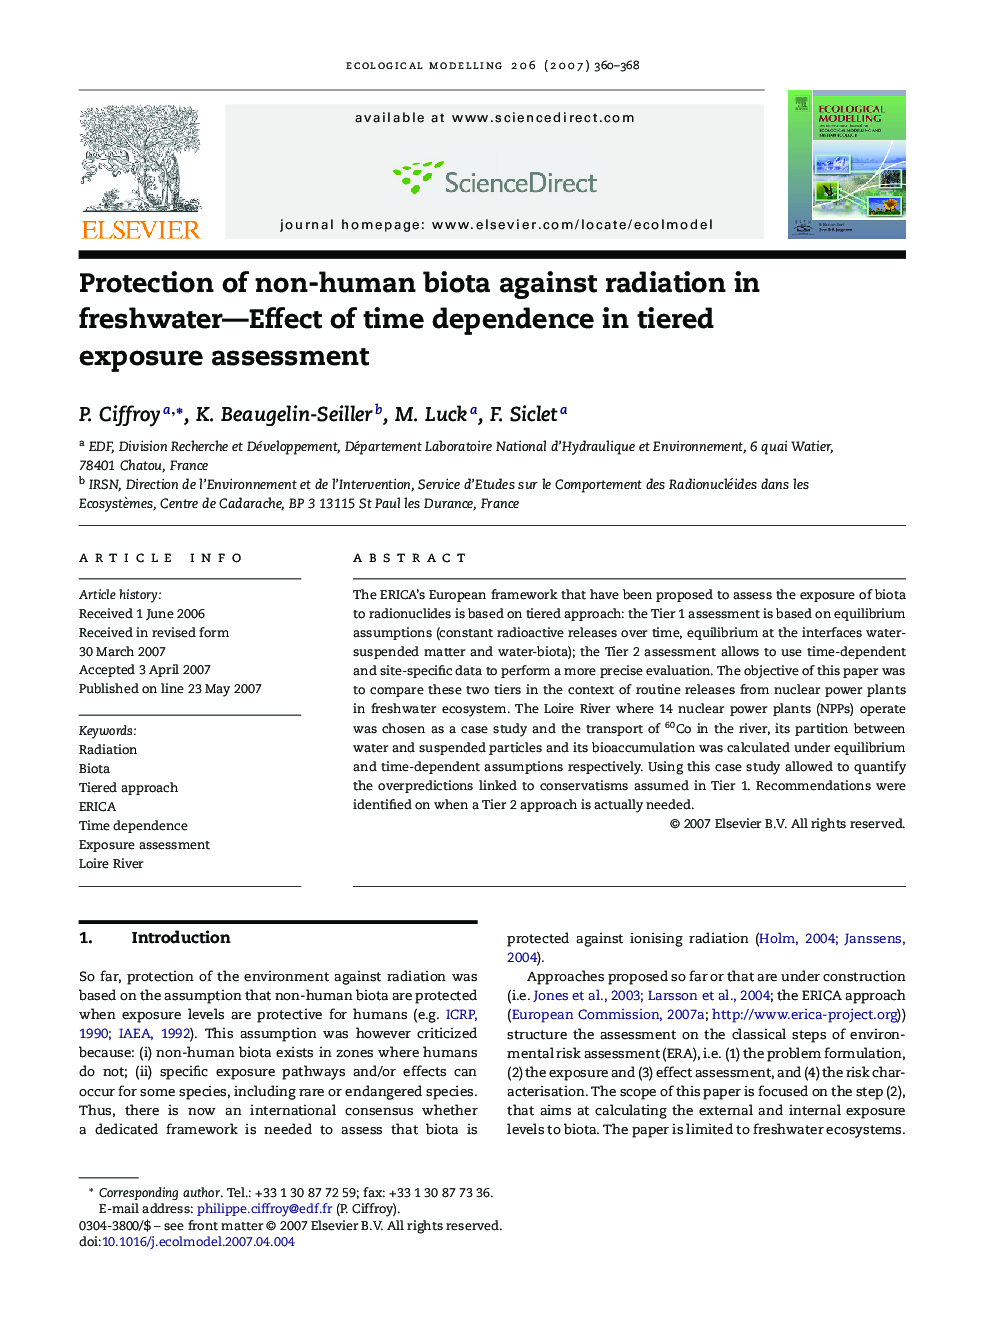 Protection of non-human biota against radiation in freshwater—Effect of time dependence in tiered exposure assessment